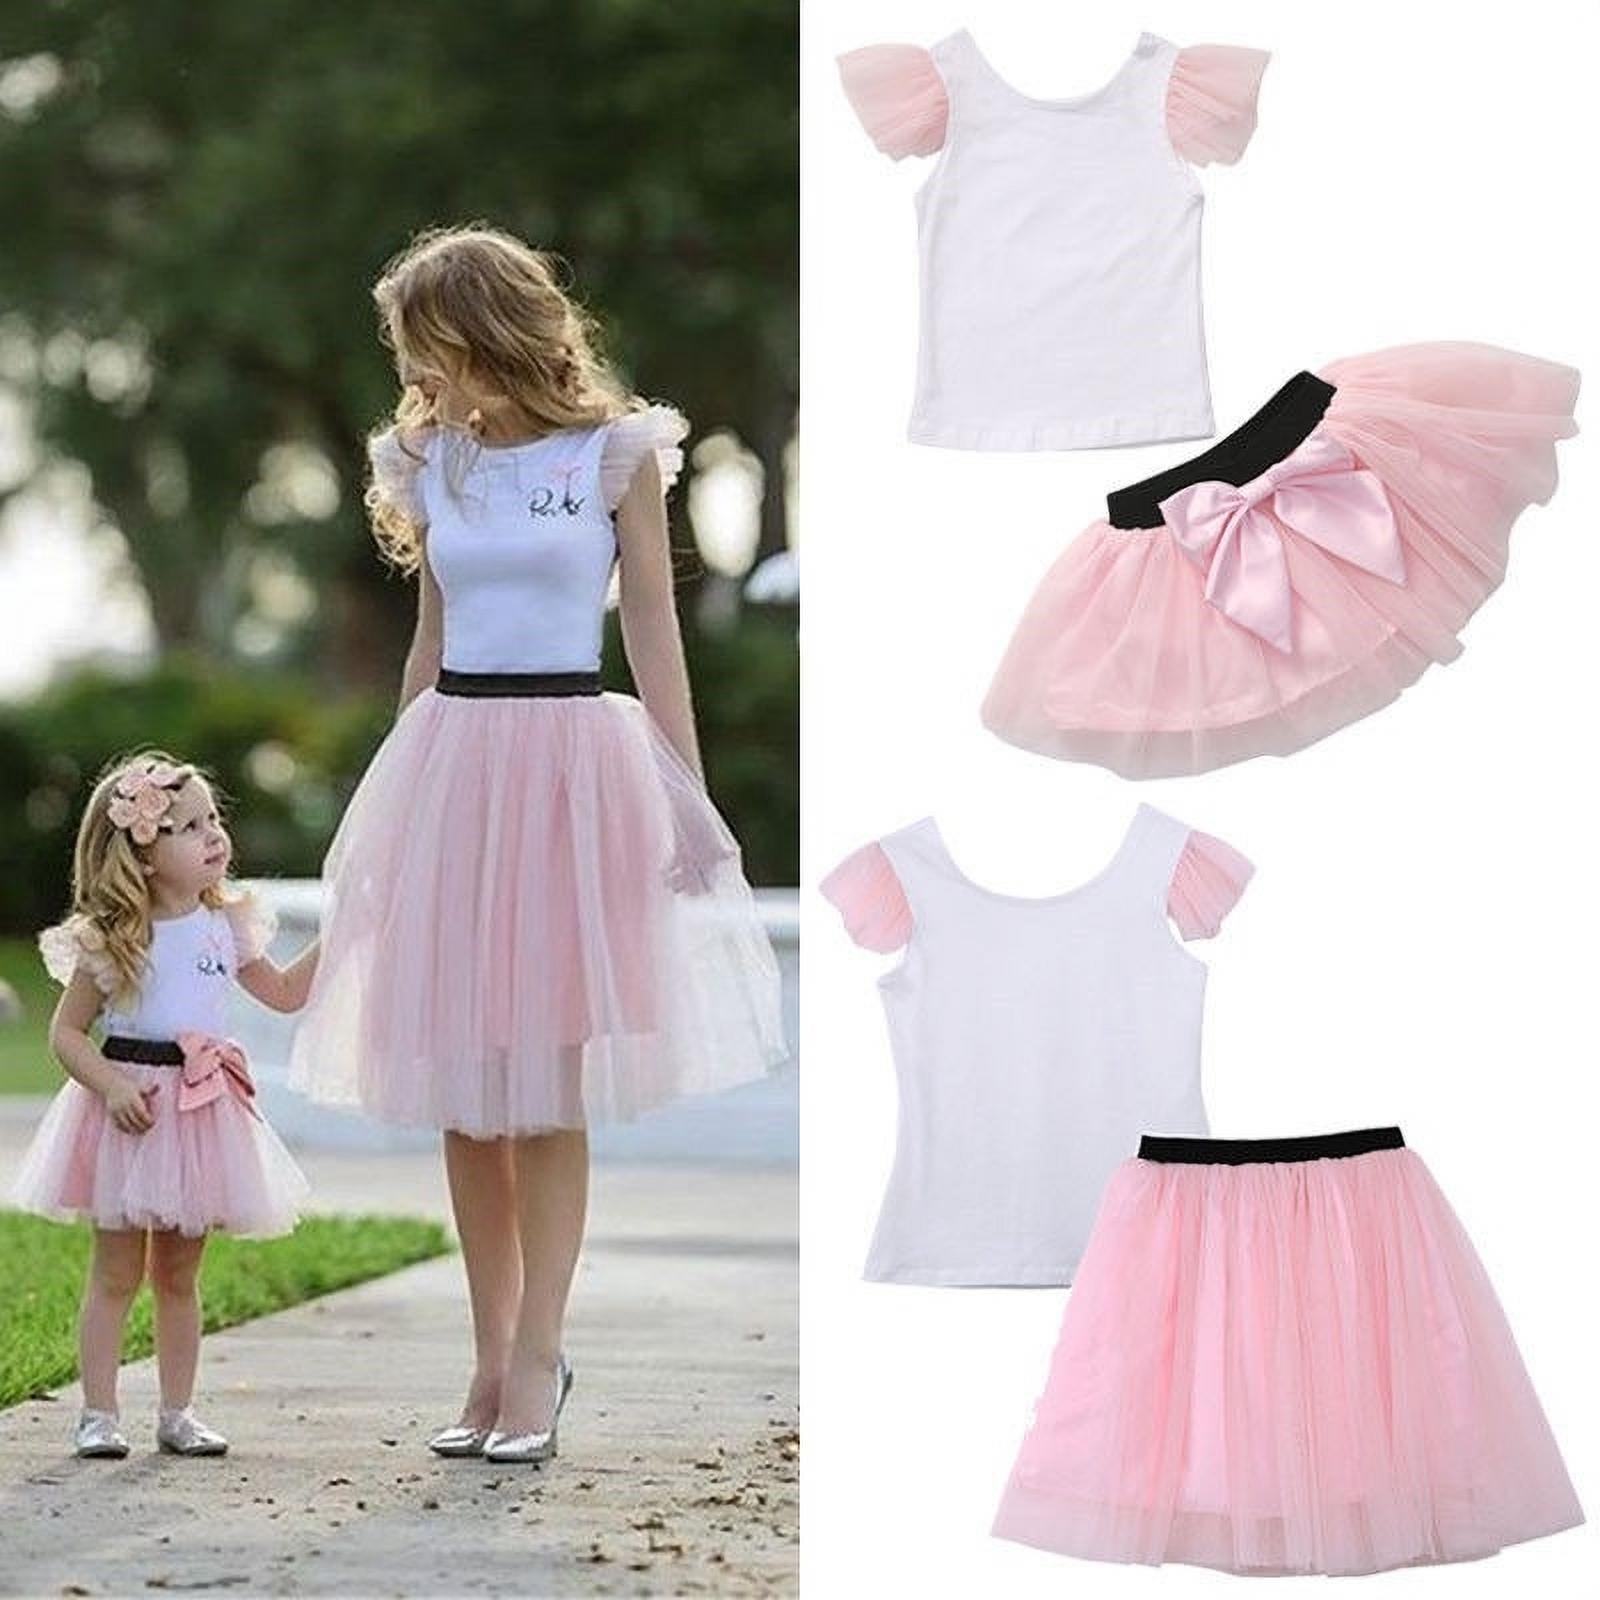 Tutu Skirt Dress Family Clothes Outfits Set Mom & Baby Parent-Child Demin T-shirt Tops